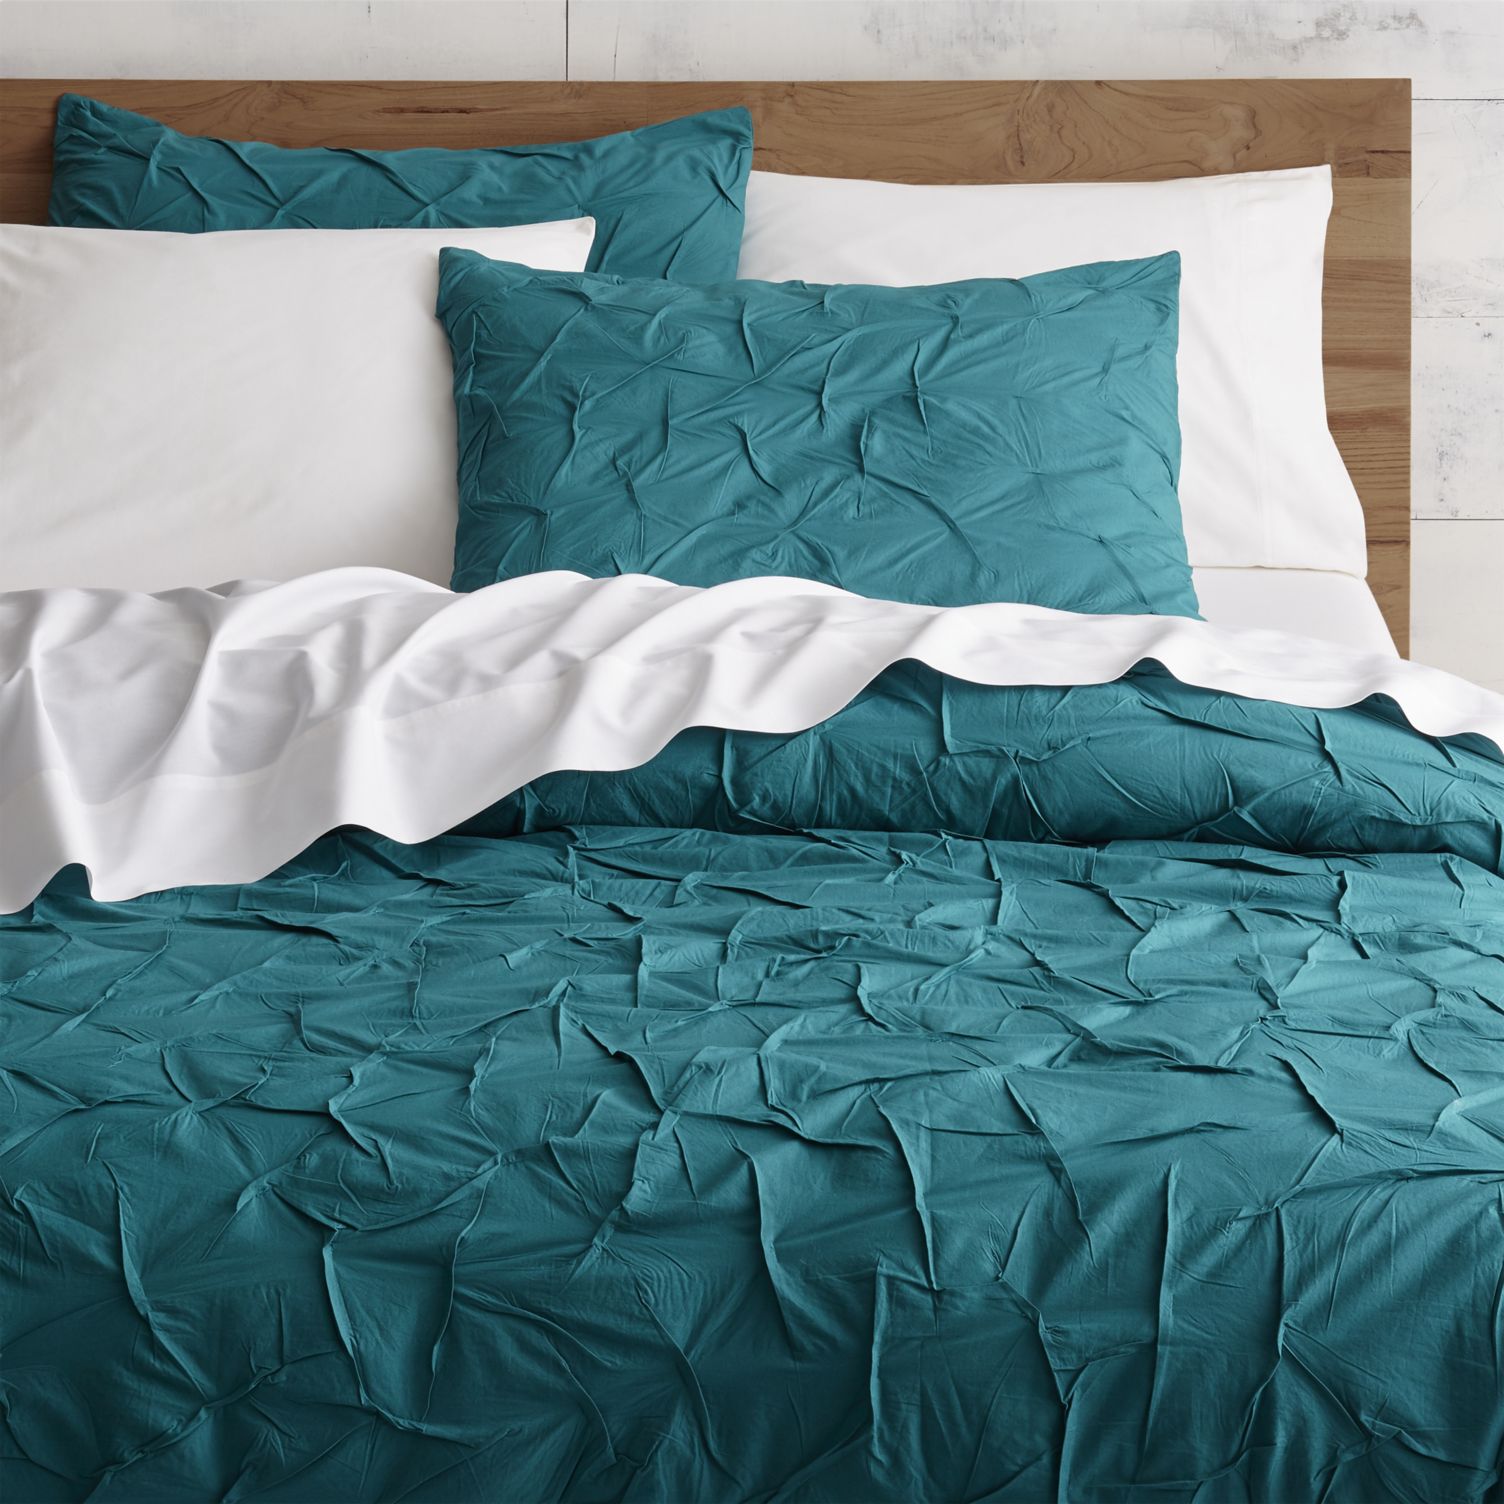 Teal-bedding-from-CB2